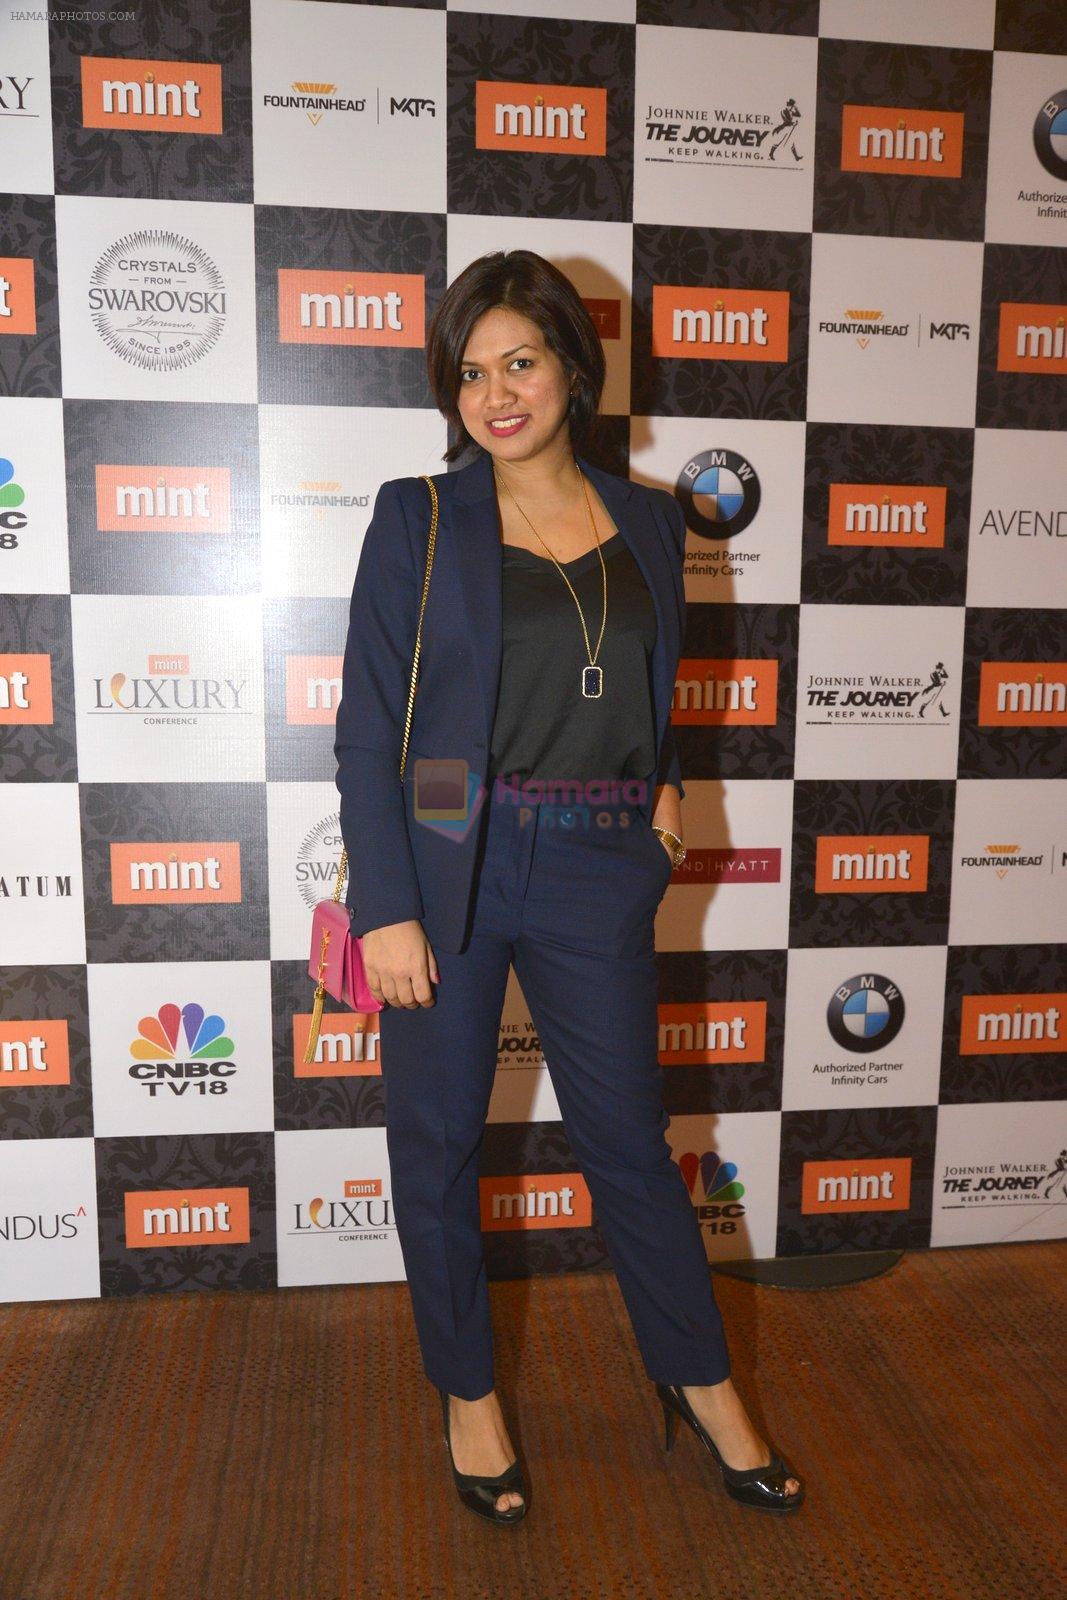 at mint luxury conference on 28th March 2016